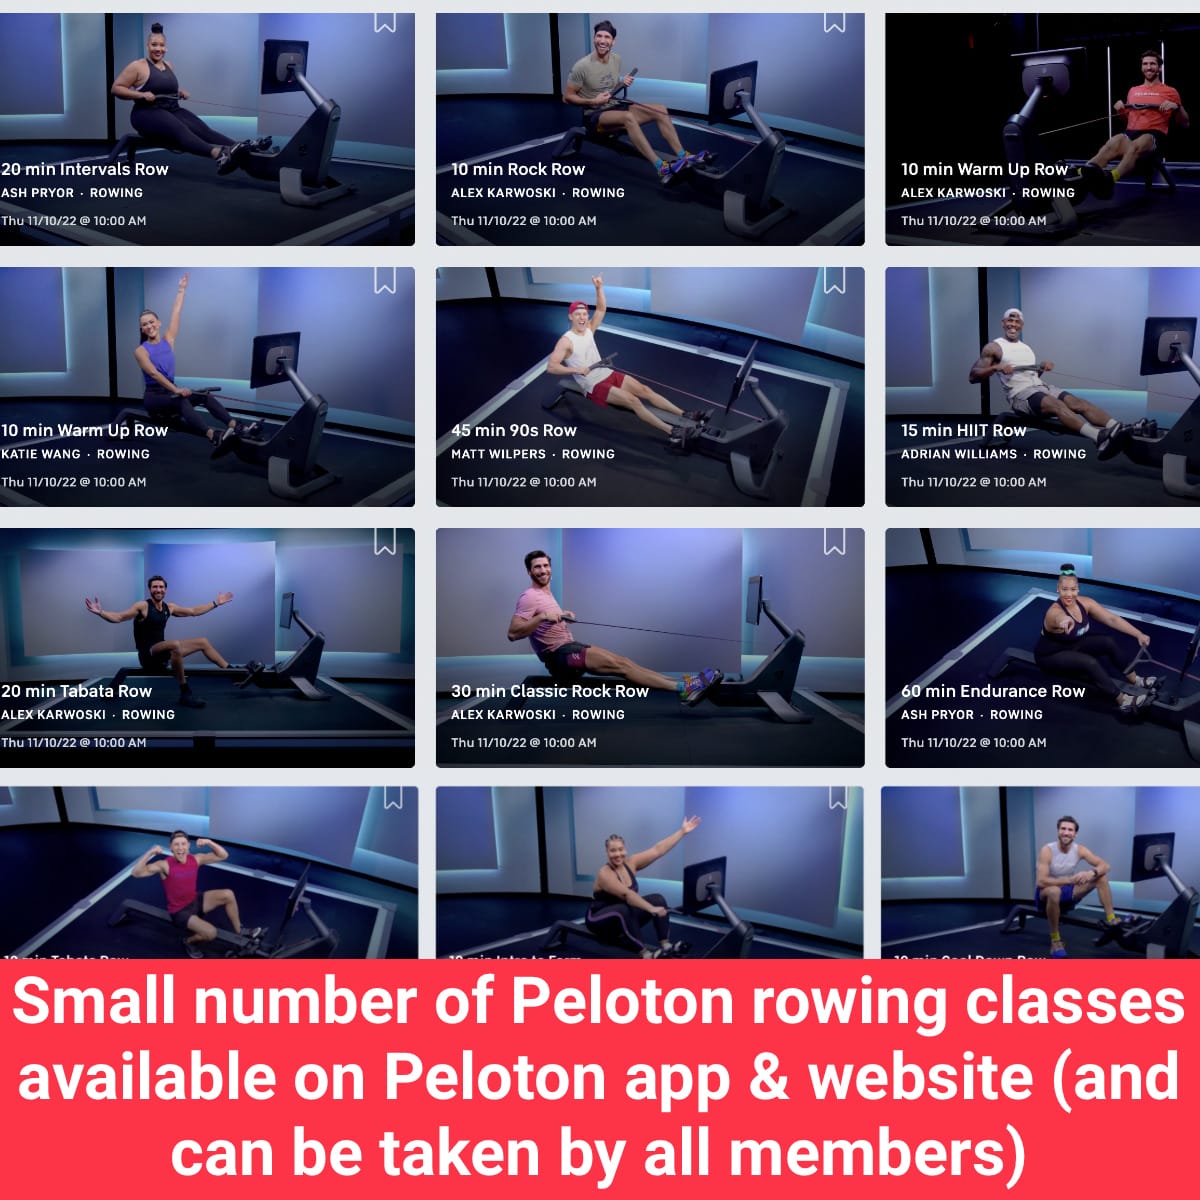 Small number of Peloton rowing classes available on Peloton app and website (and can be taken by all members)